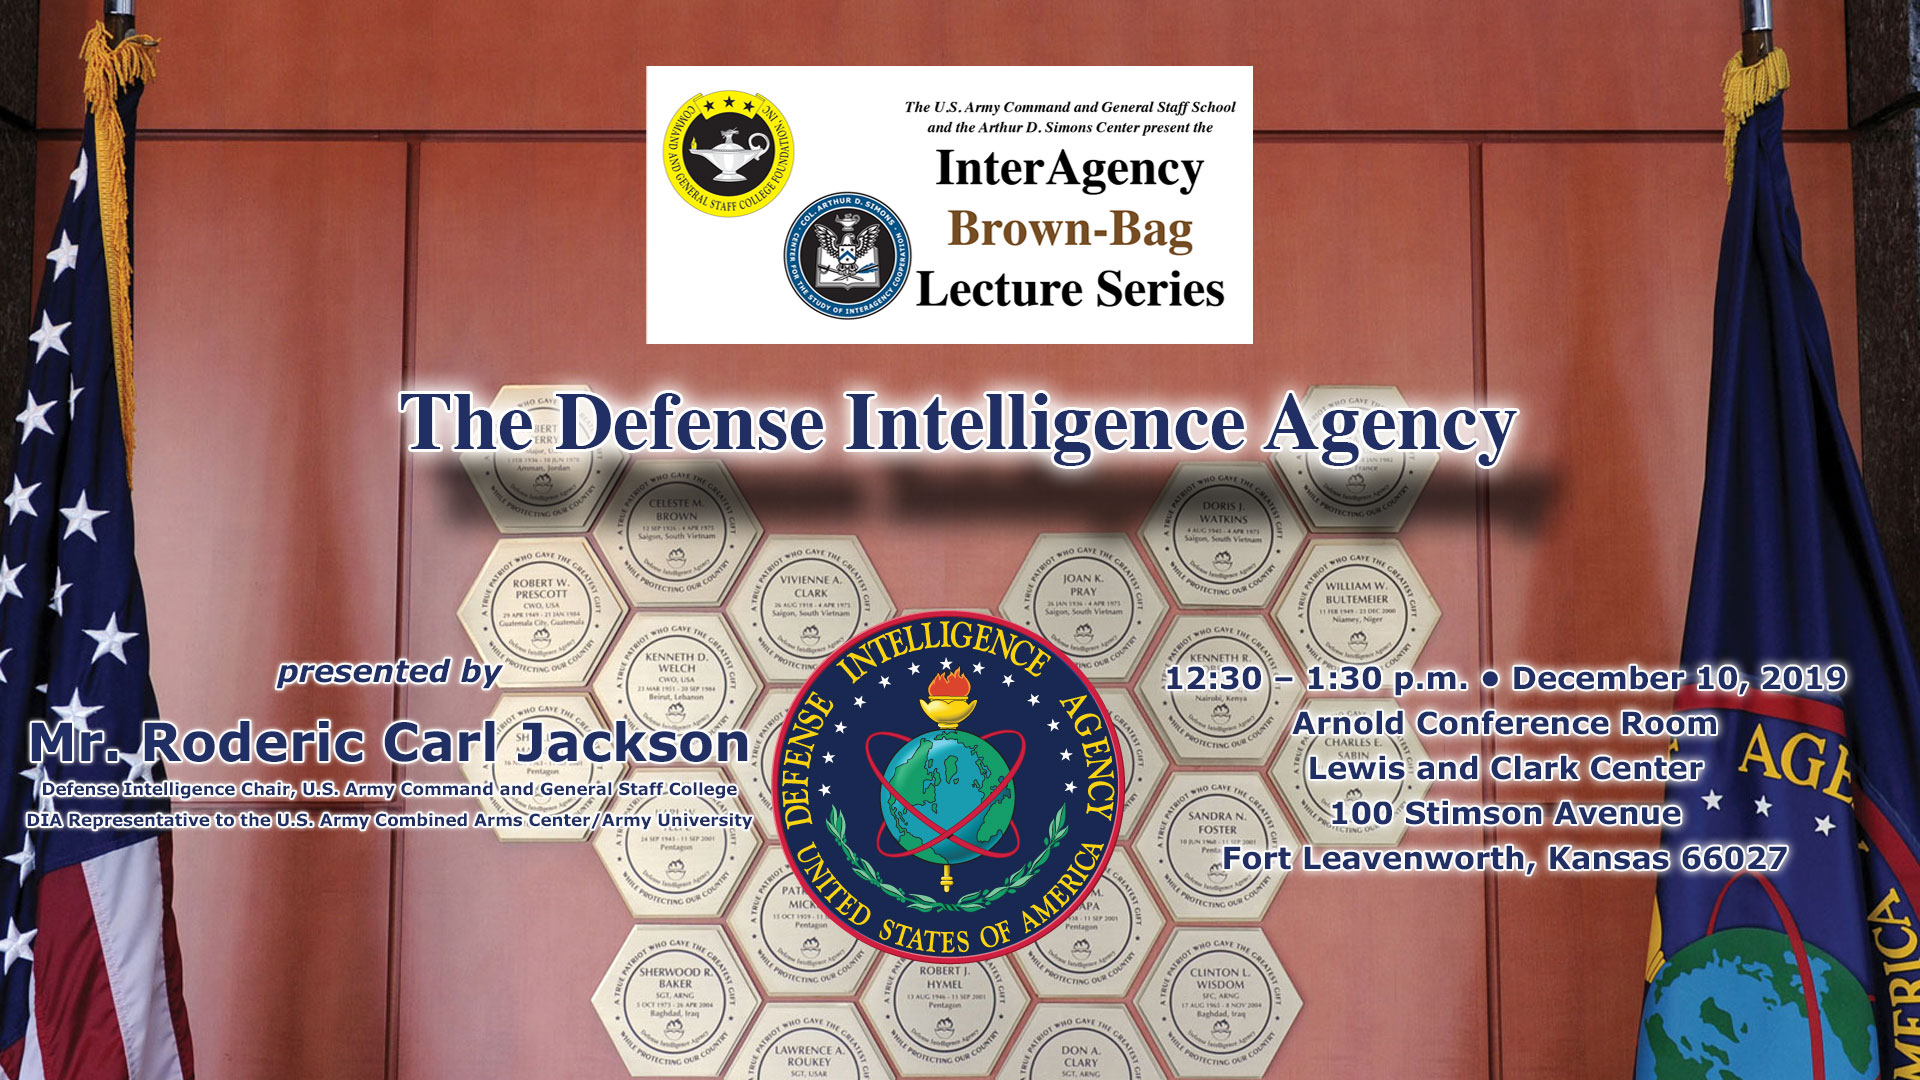 InterAgency Brownbag Lecture info image with speaker/dates/location